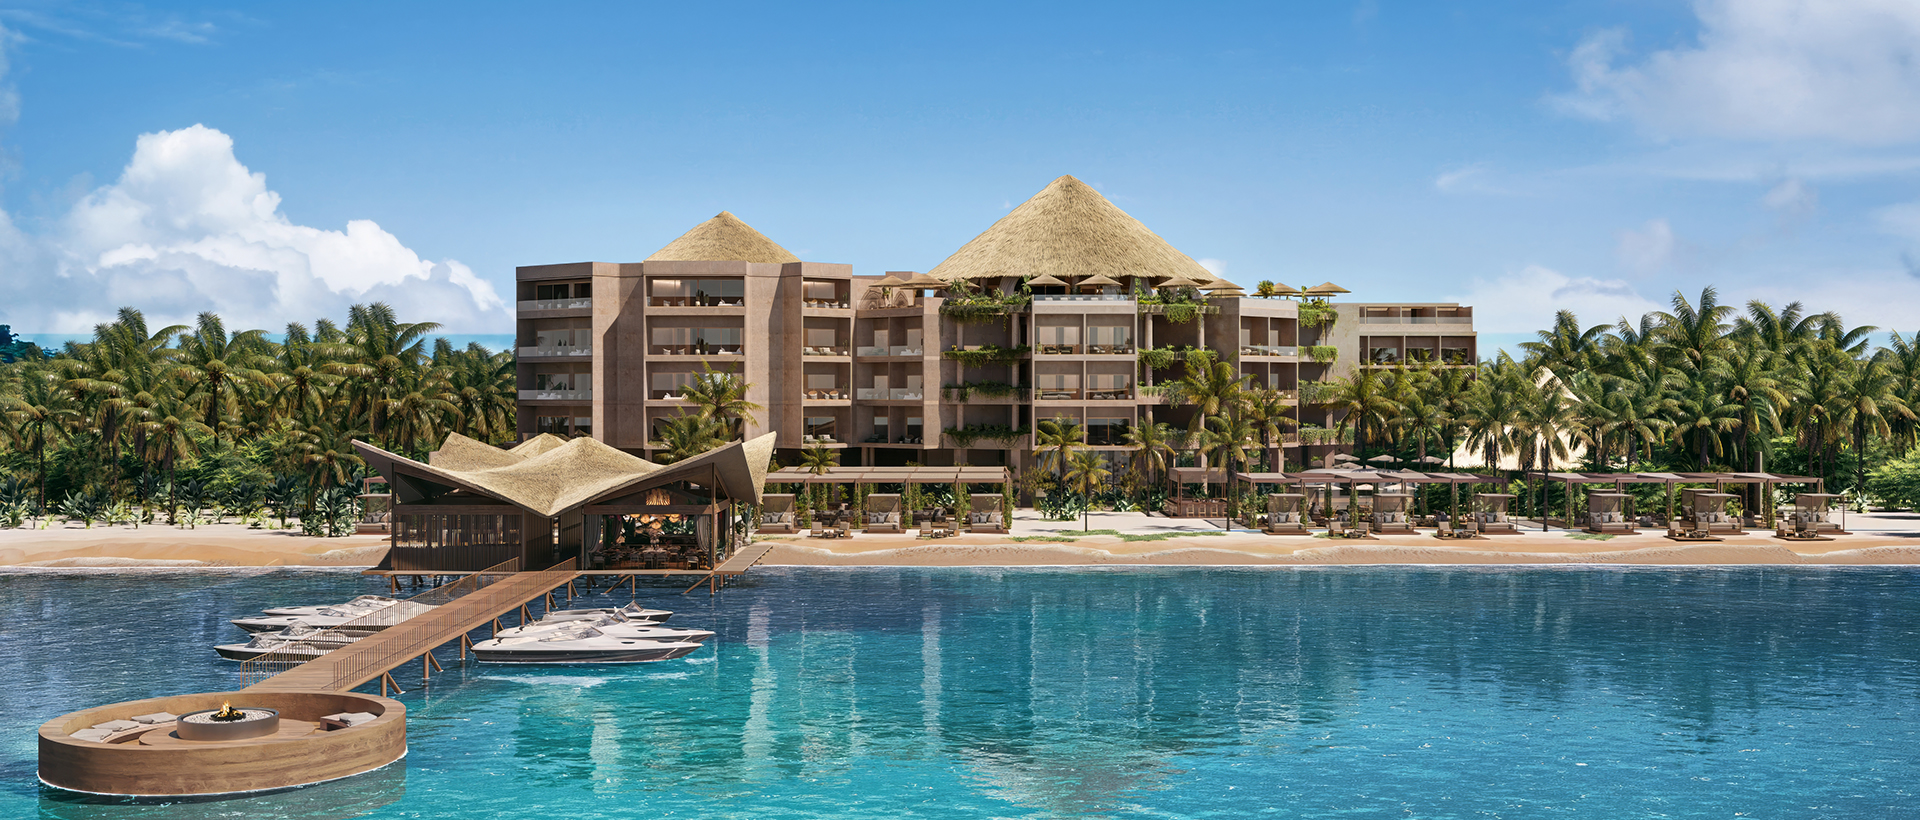 Almare, A Luxury Collection All-Inclusive Resort, Isla Mujeres